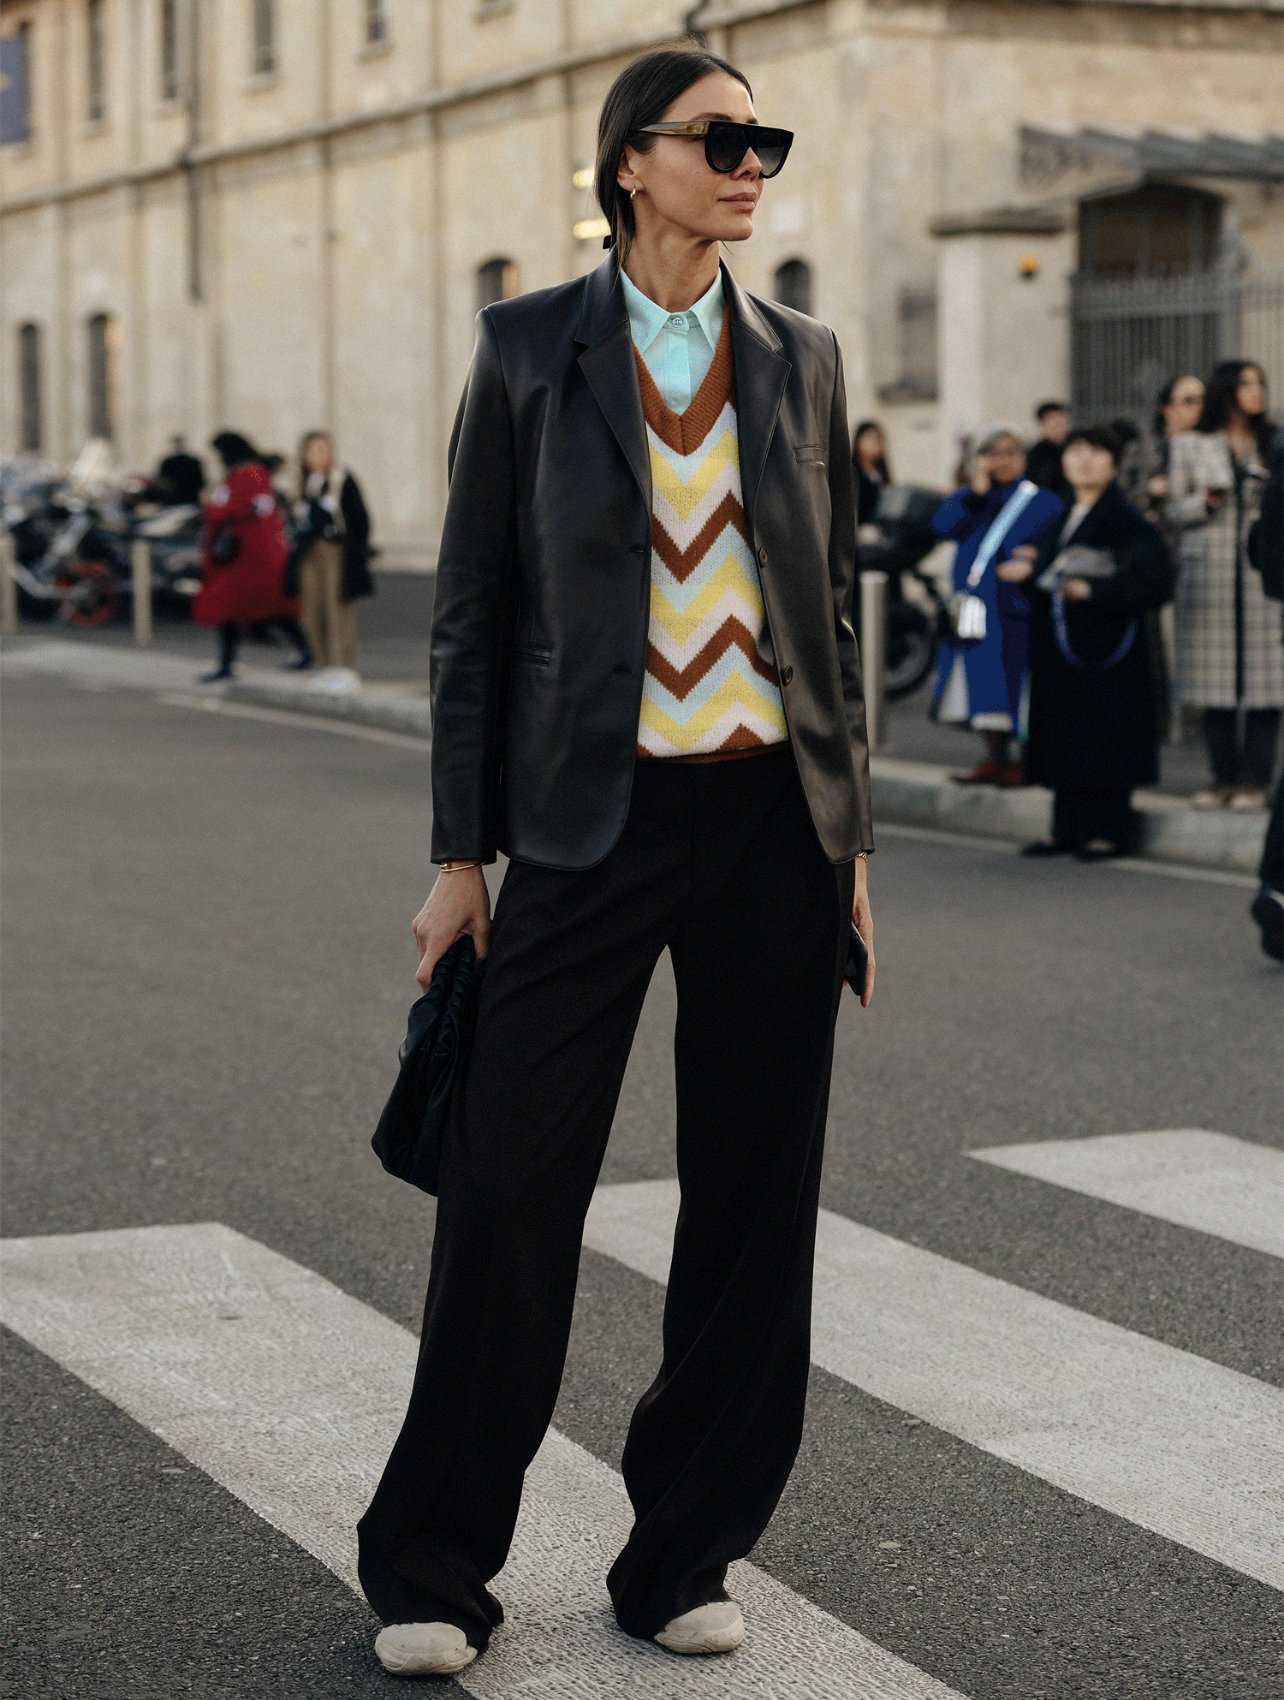 A clever layering piece: vests — Marcia Crivorot